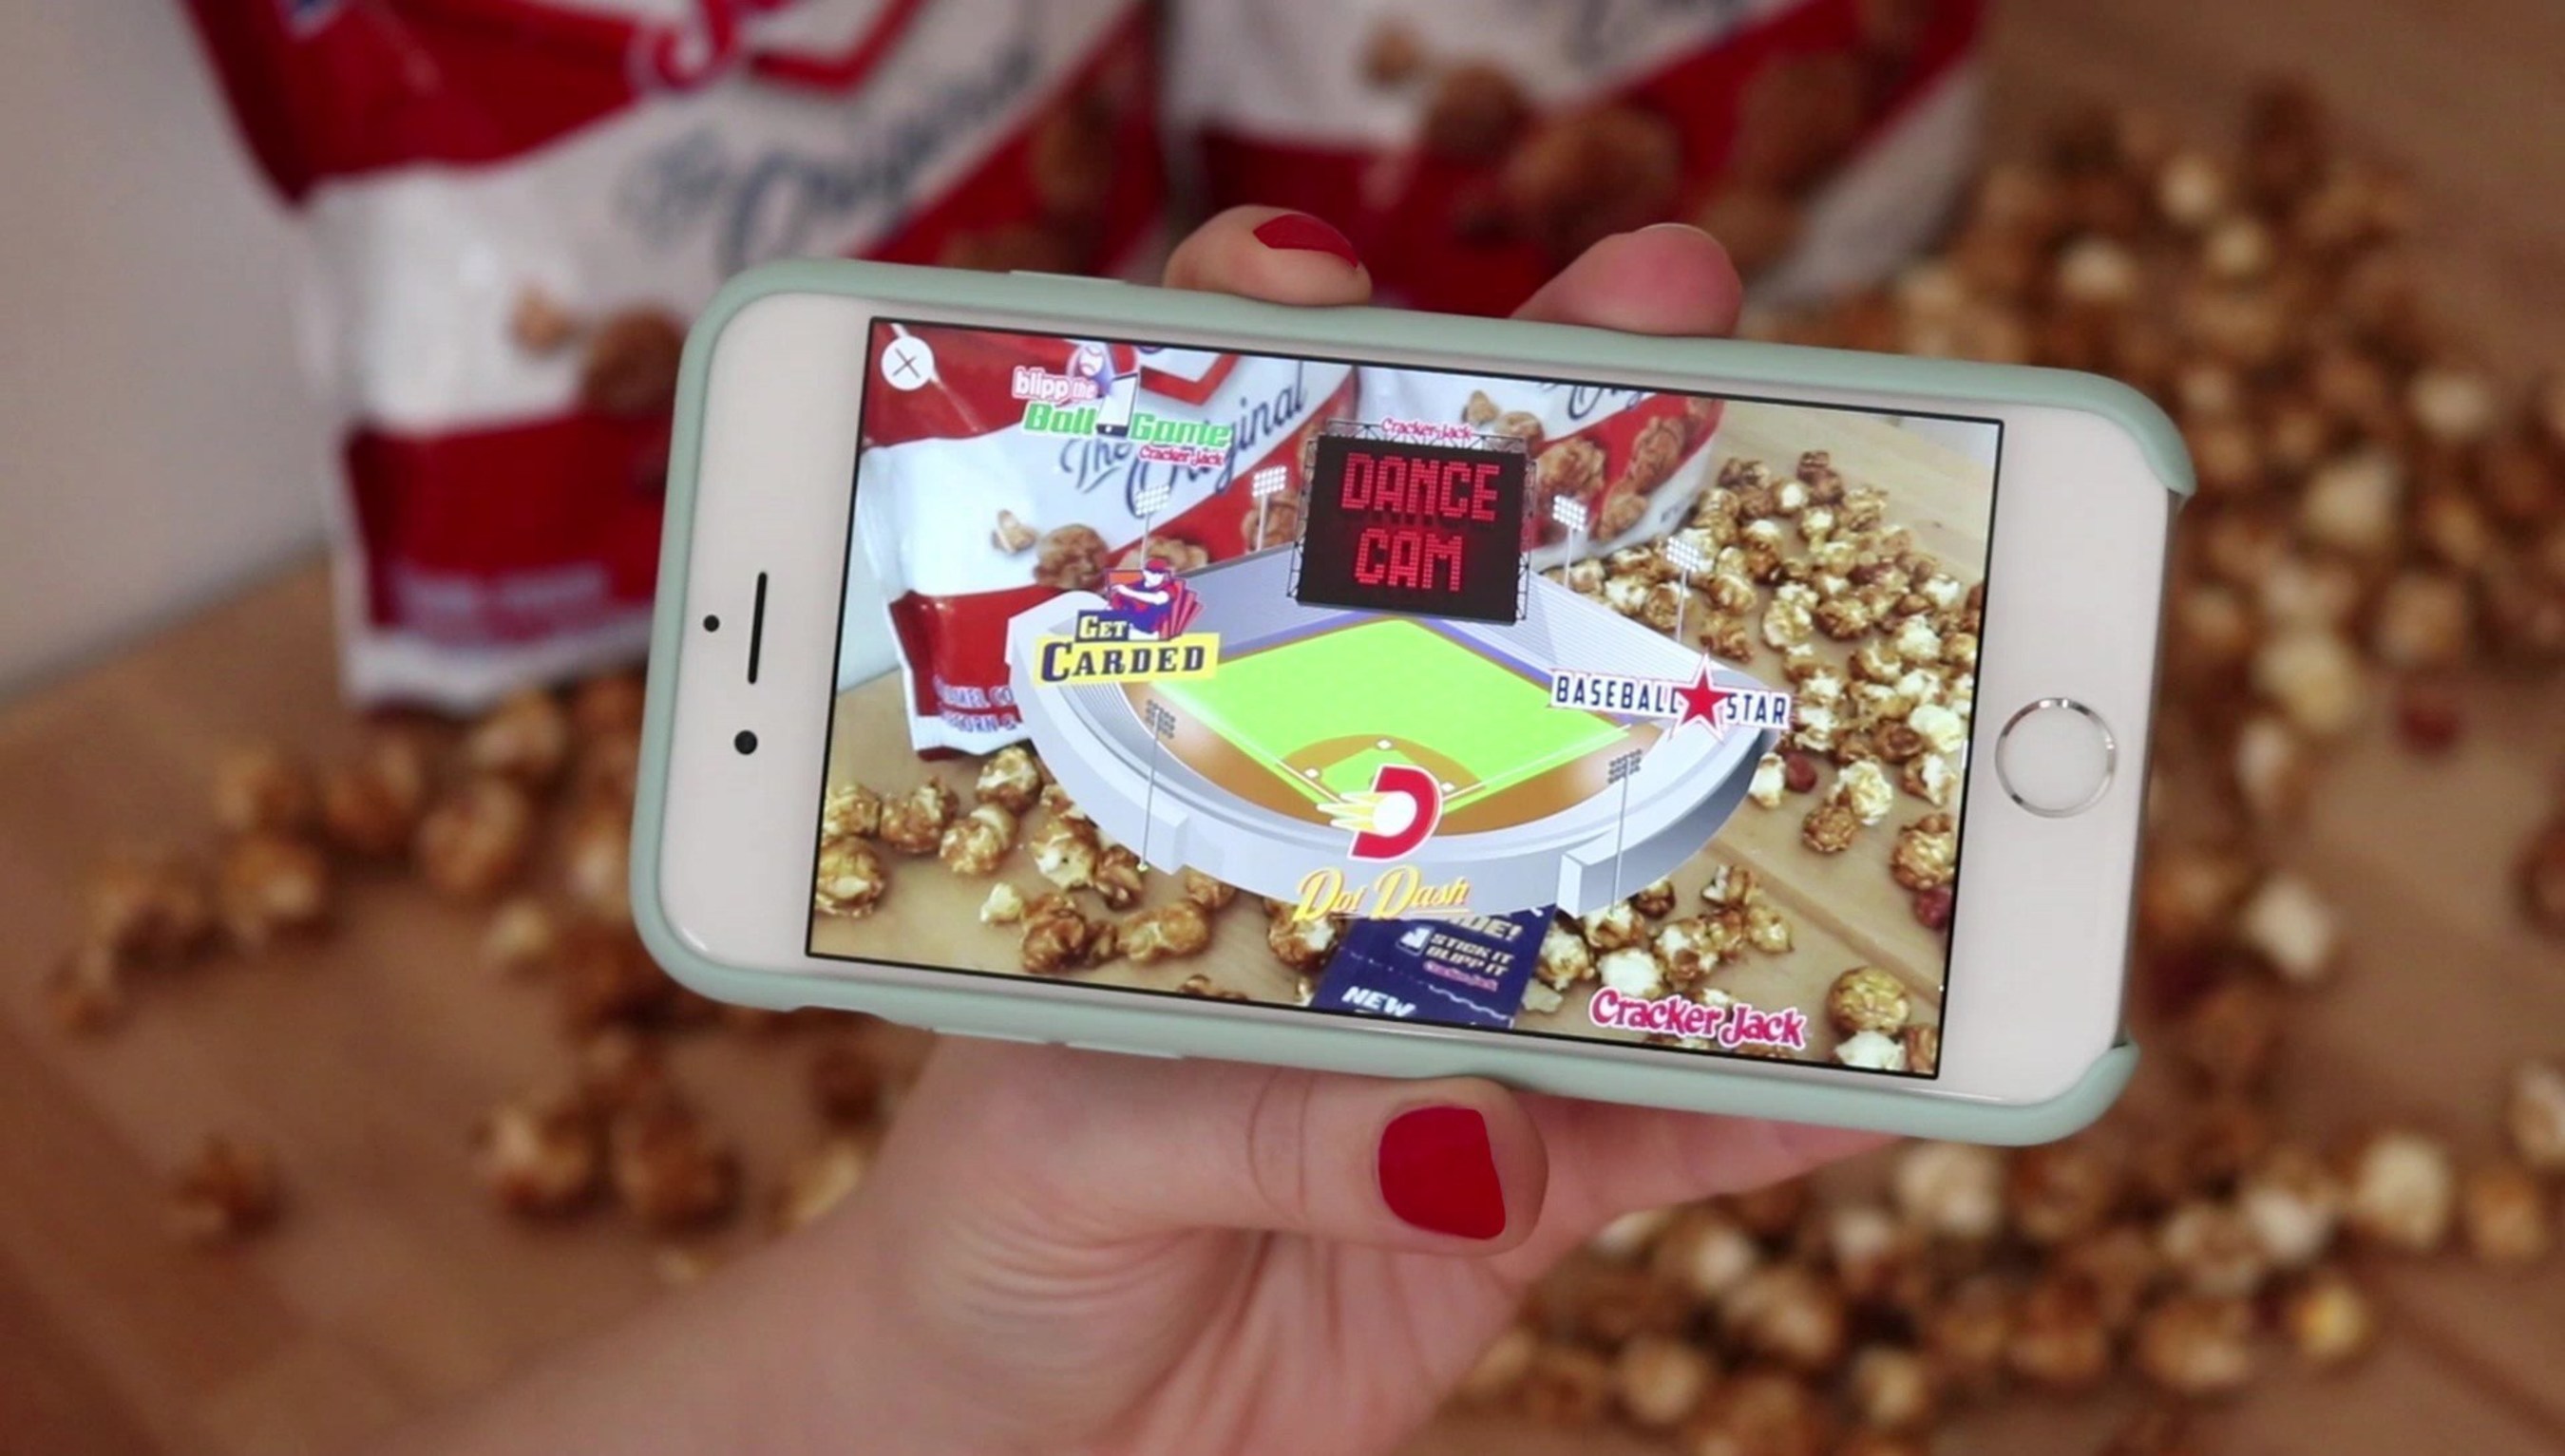 The new Prize Inside mobile experience brings the ballpark to life with four-baseball themed games: Dot Dash, Dance Cam, Get Carded and Baseball Star.